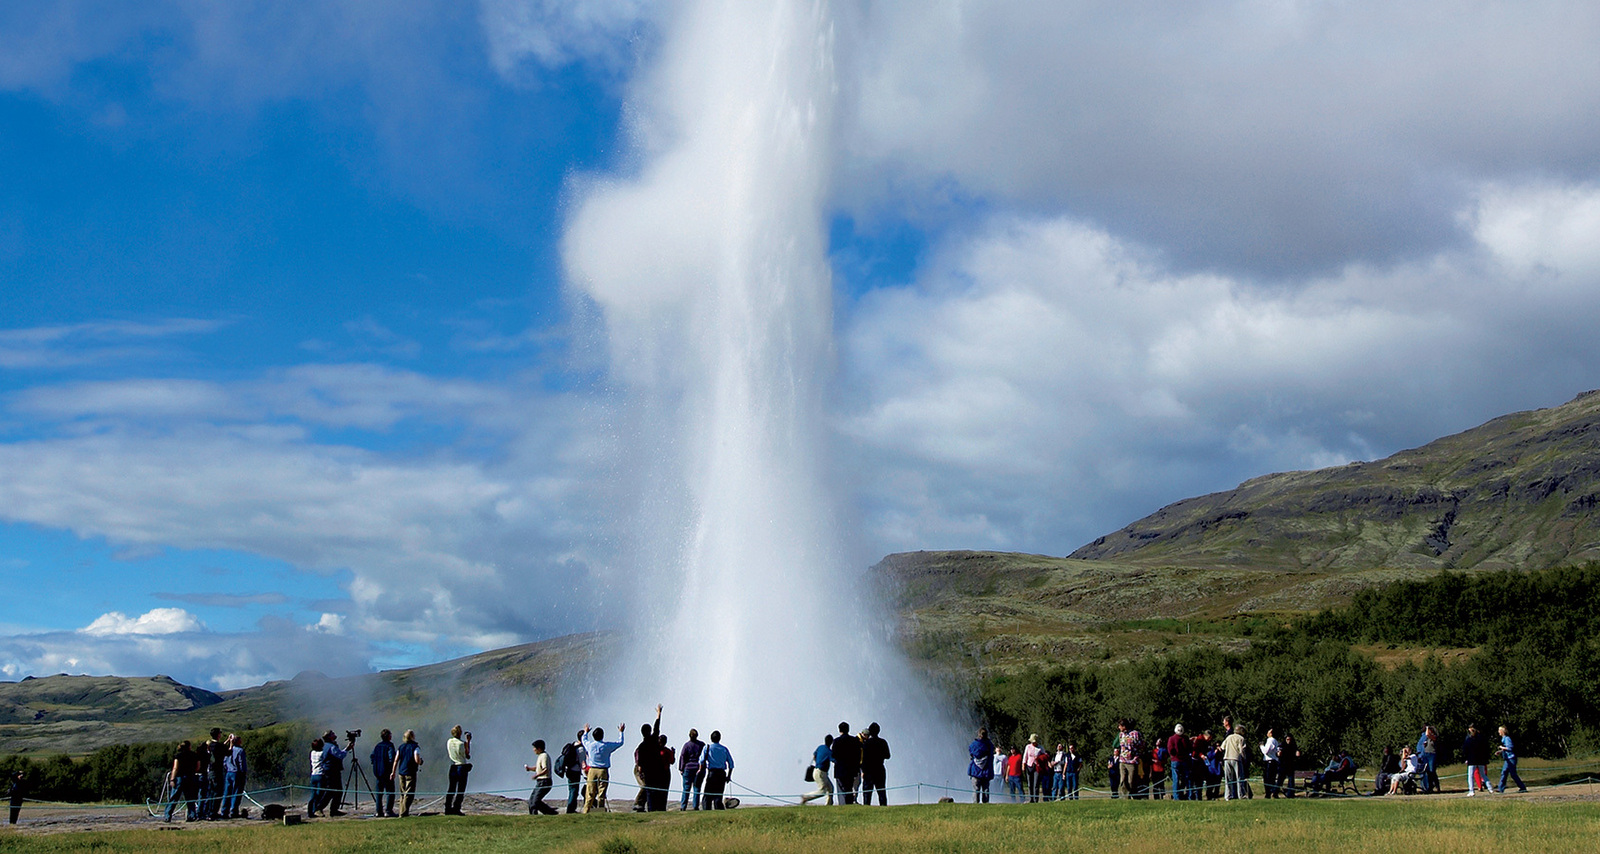 Strokkur is the most active geyser in the Geysir Geothermal area on Iceland's Golden Circle